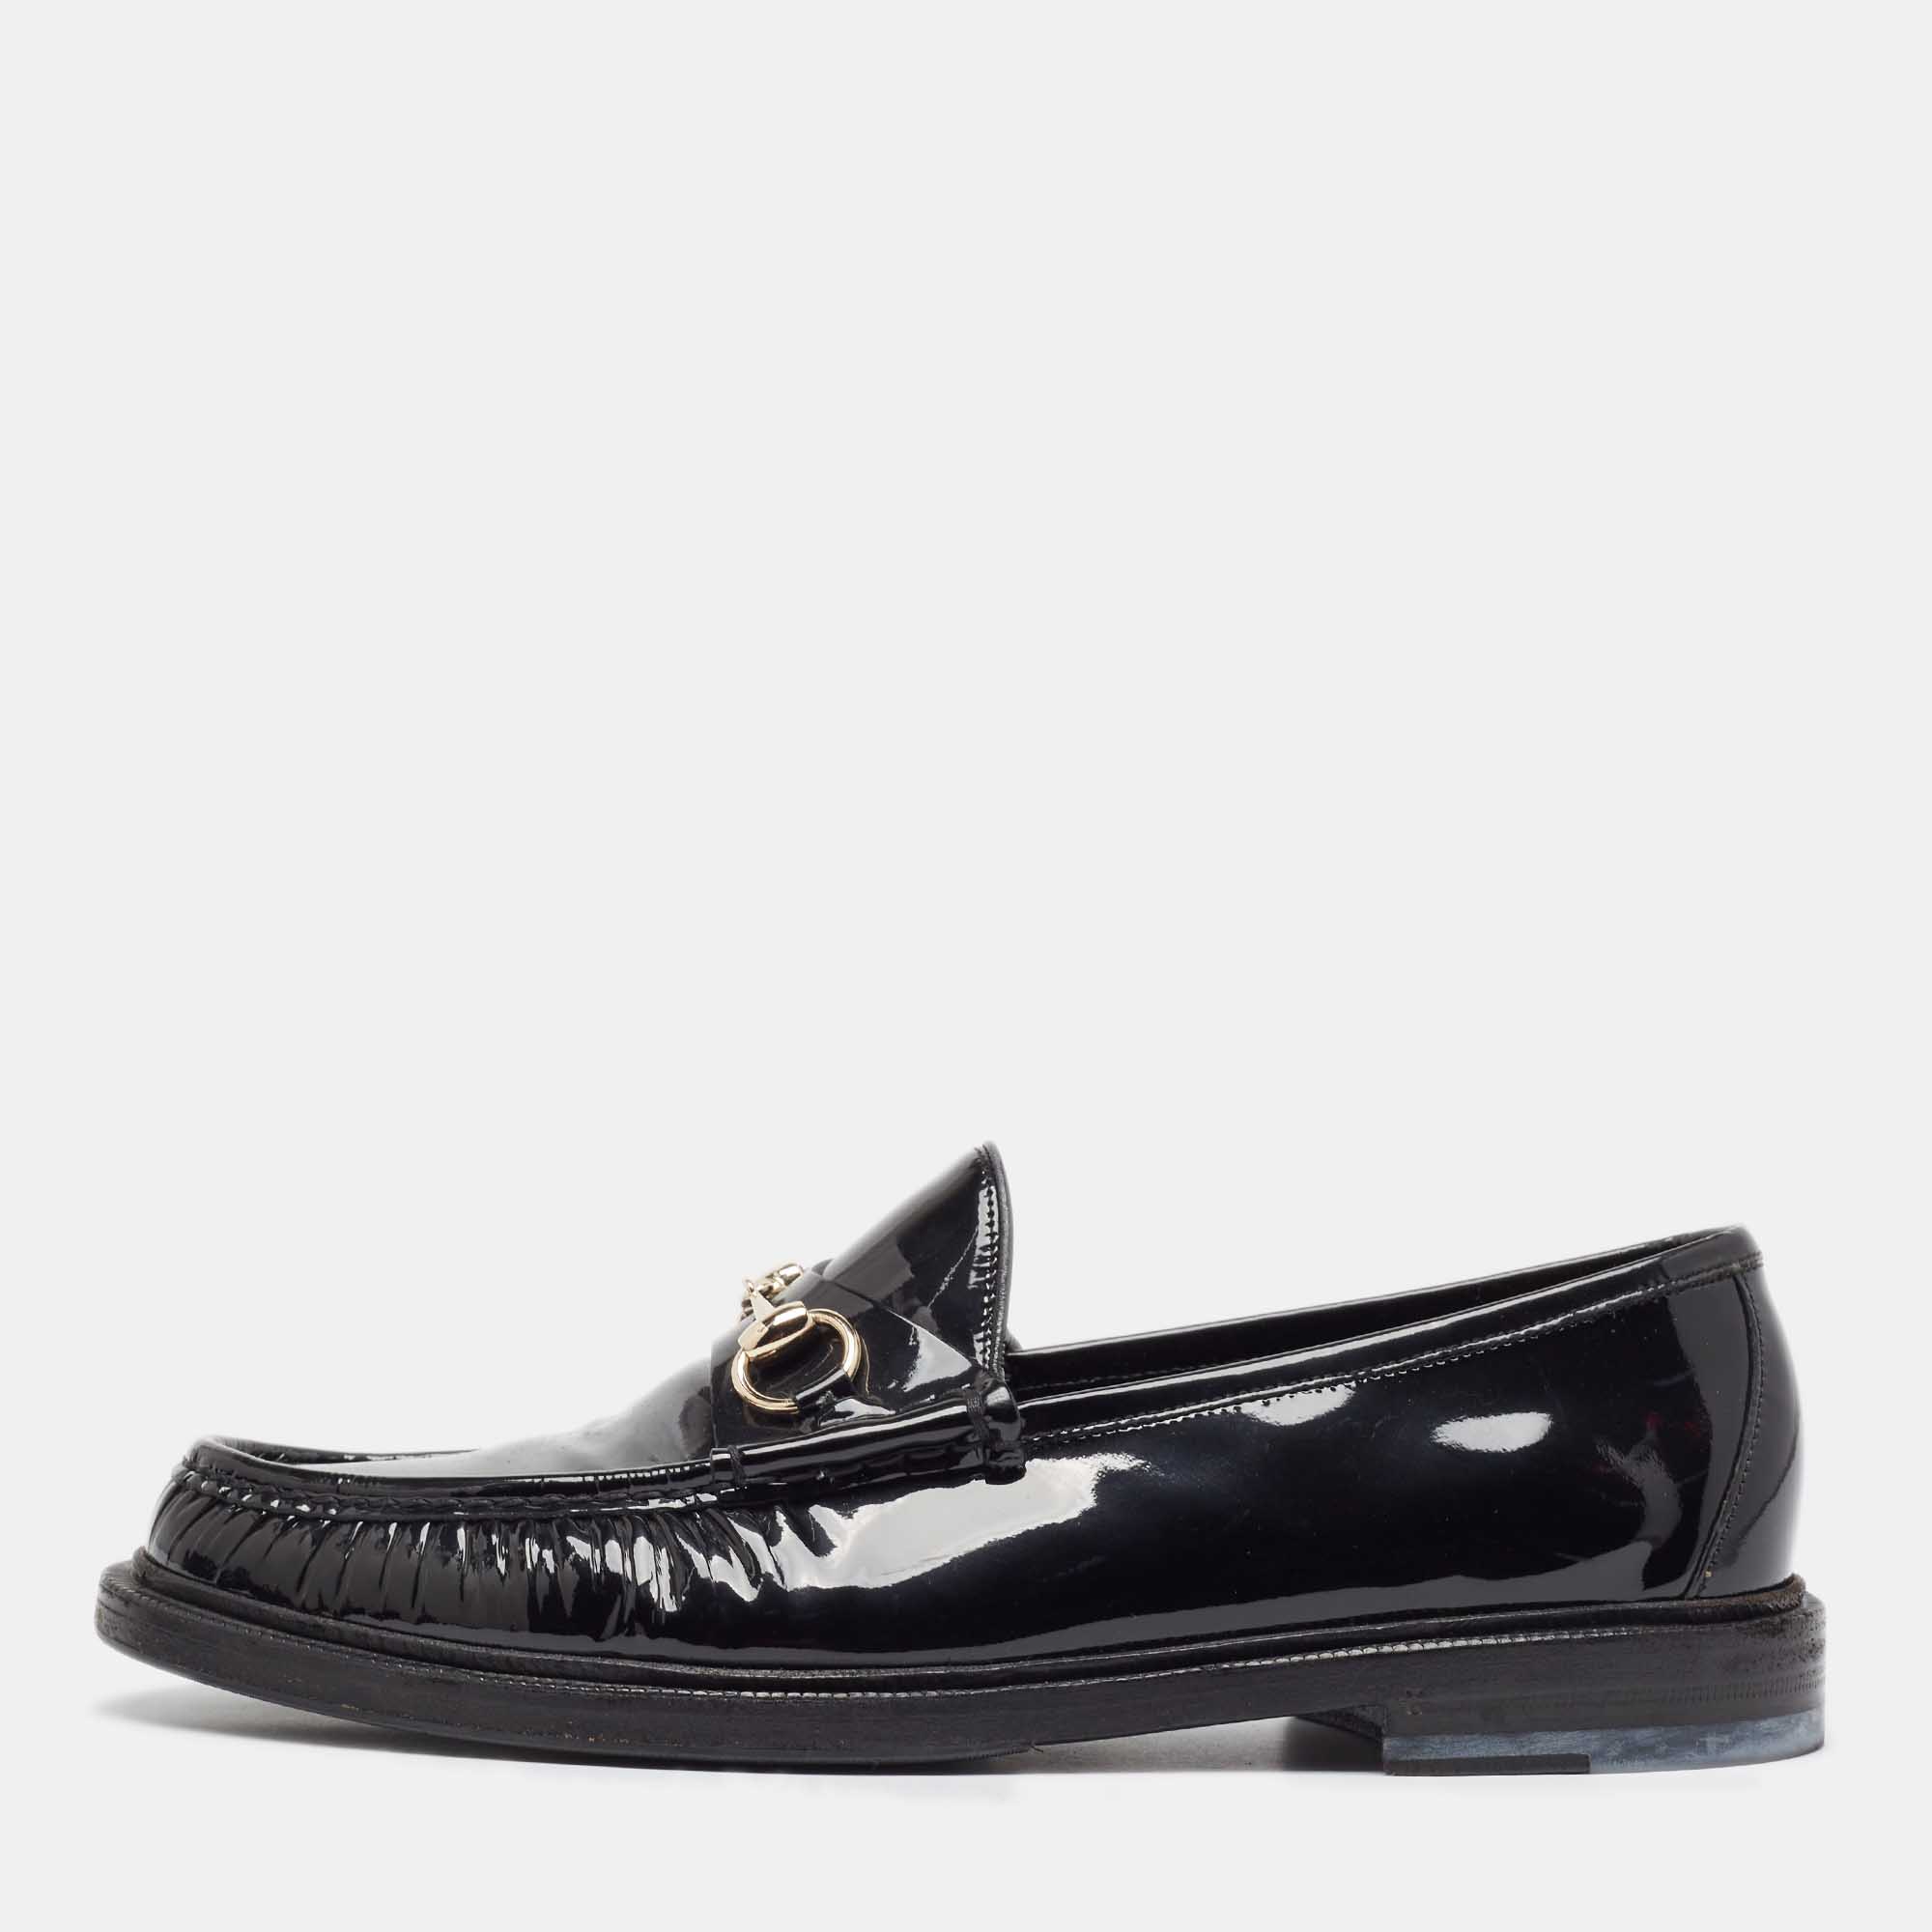 Gucci black patent leather horsebit loafers size 42.5